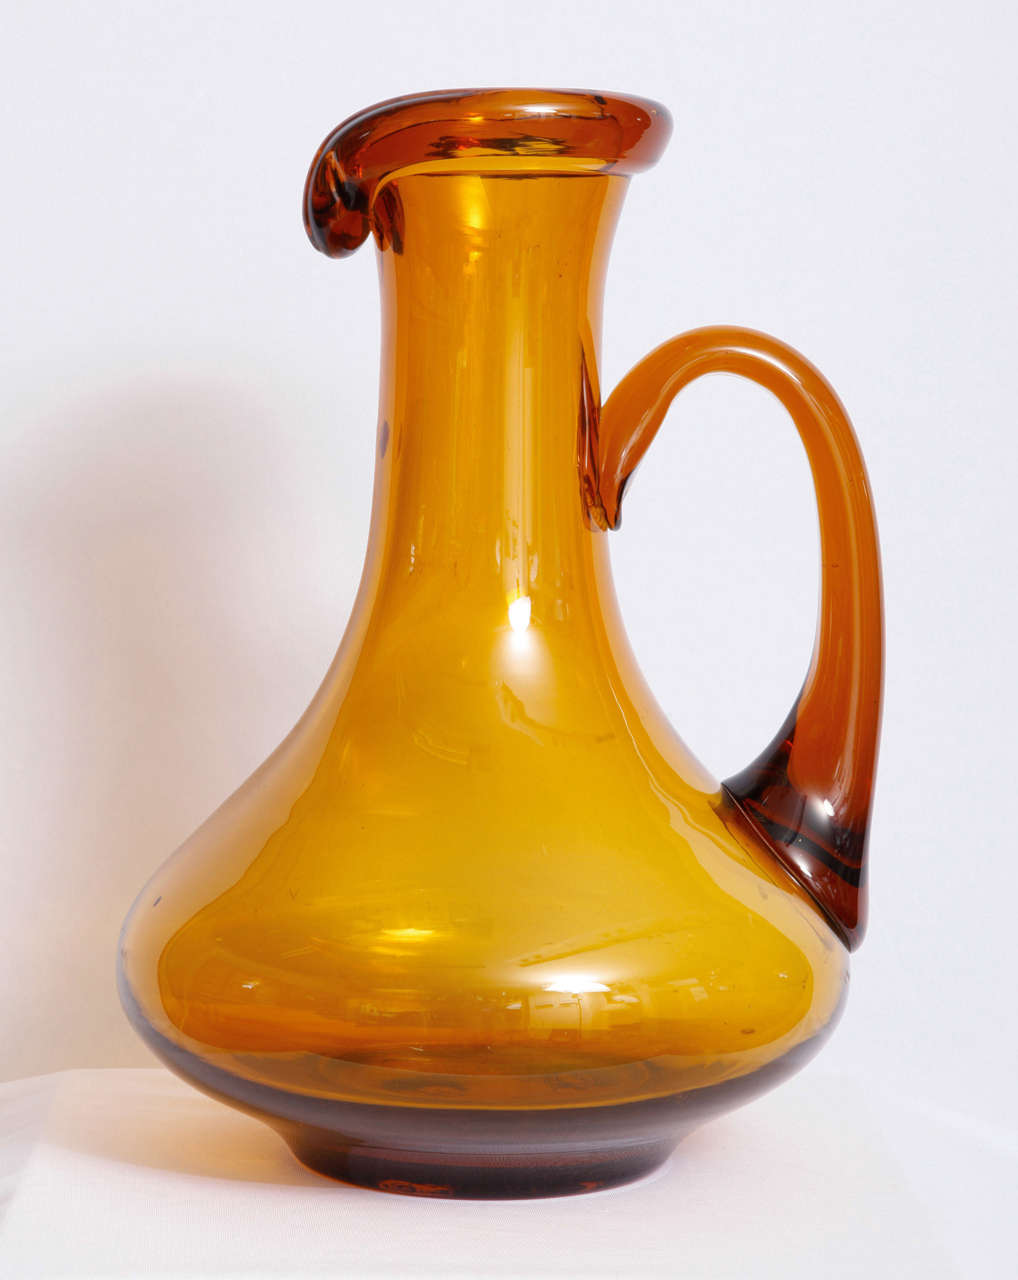 Monumental decorative jug in amber glass made in Empoli, Italy, well known city for its glass factories.